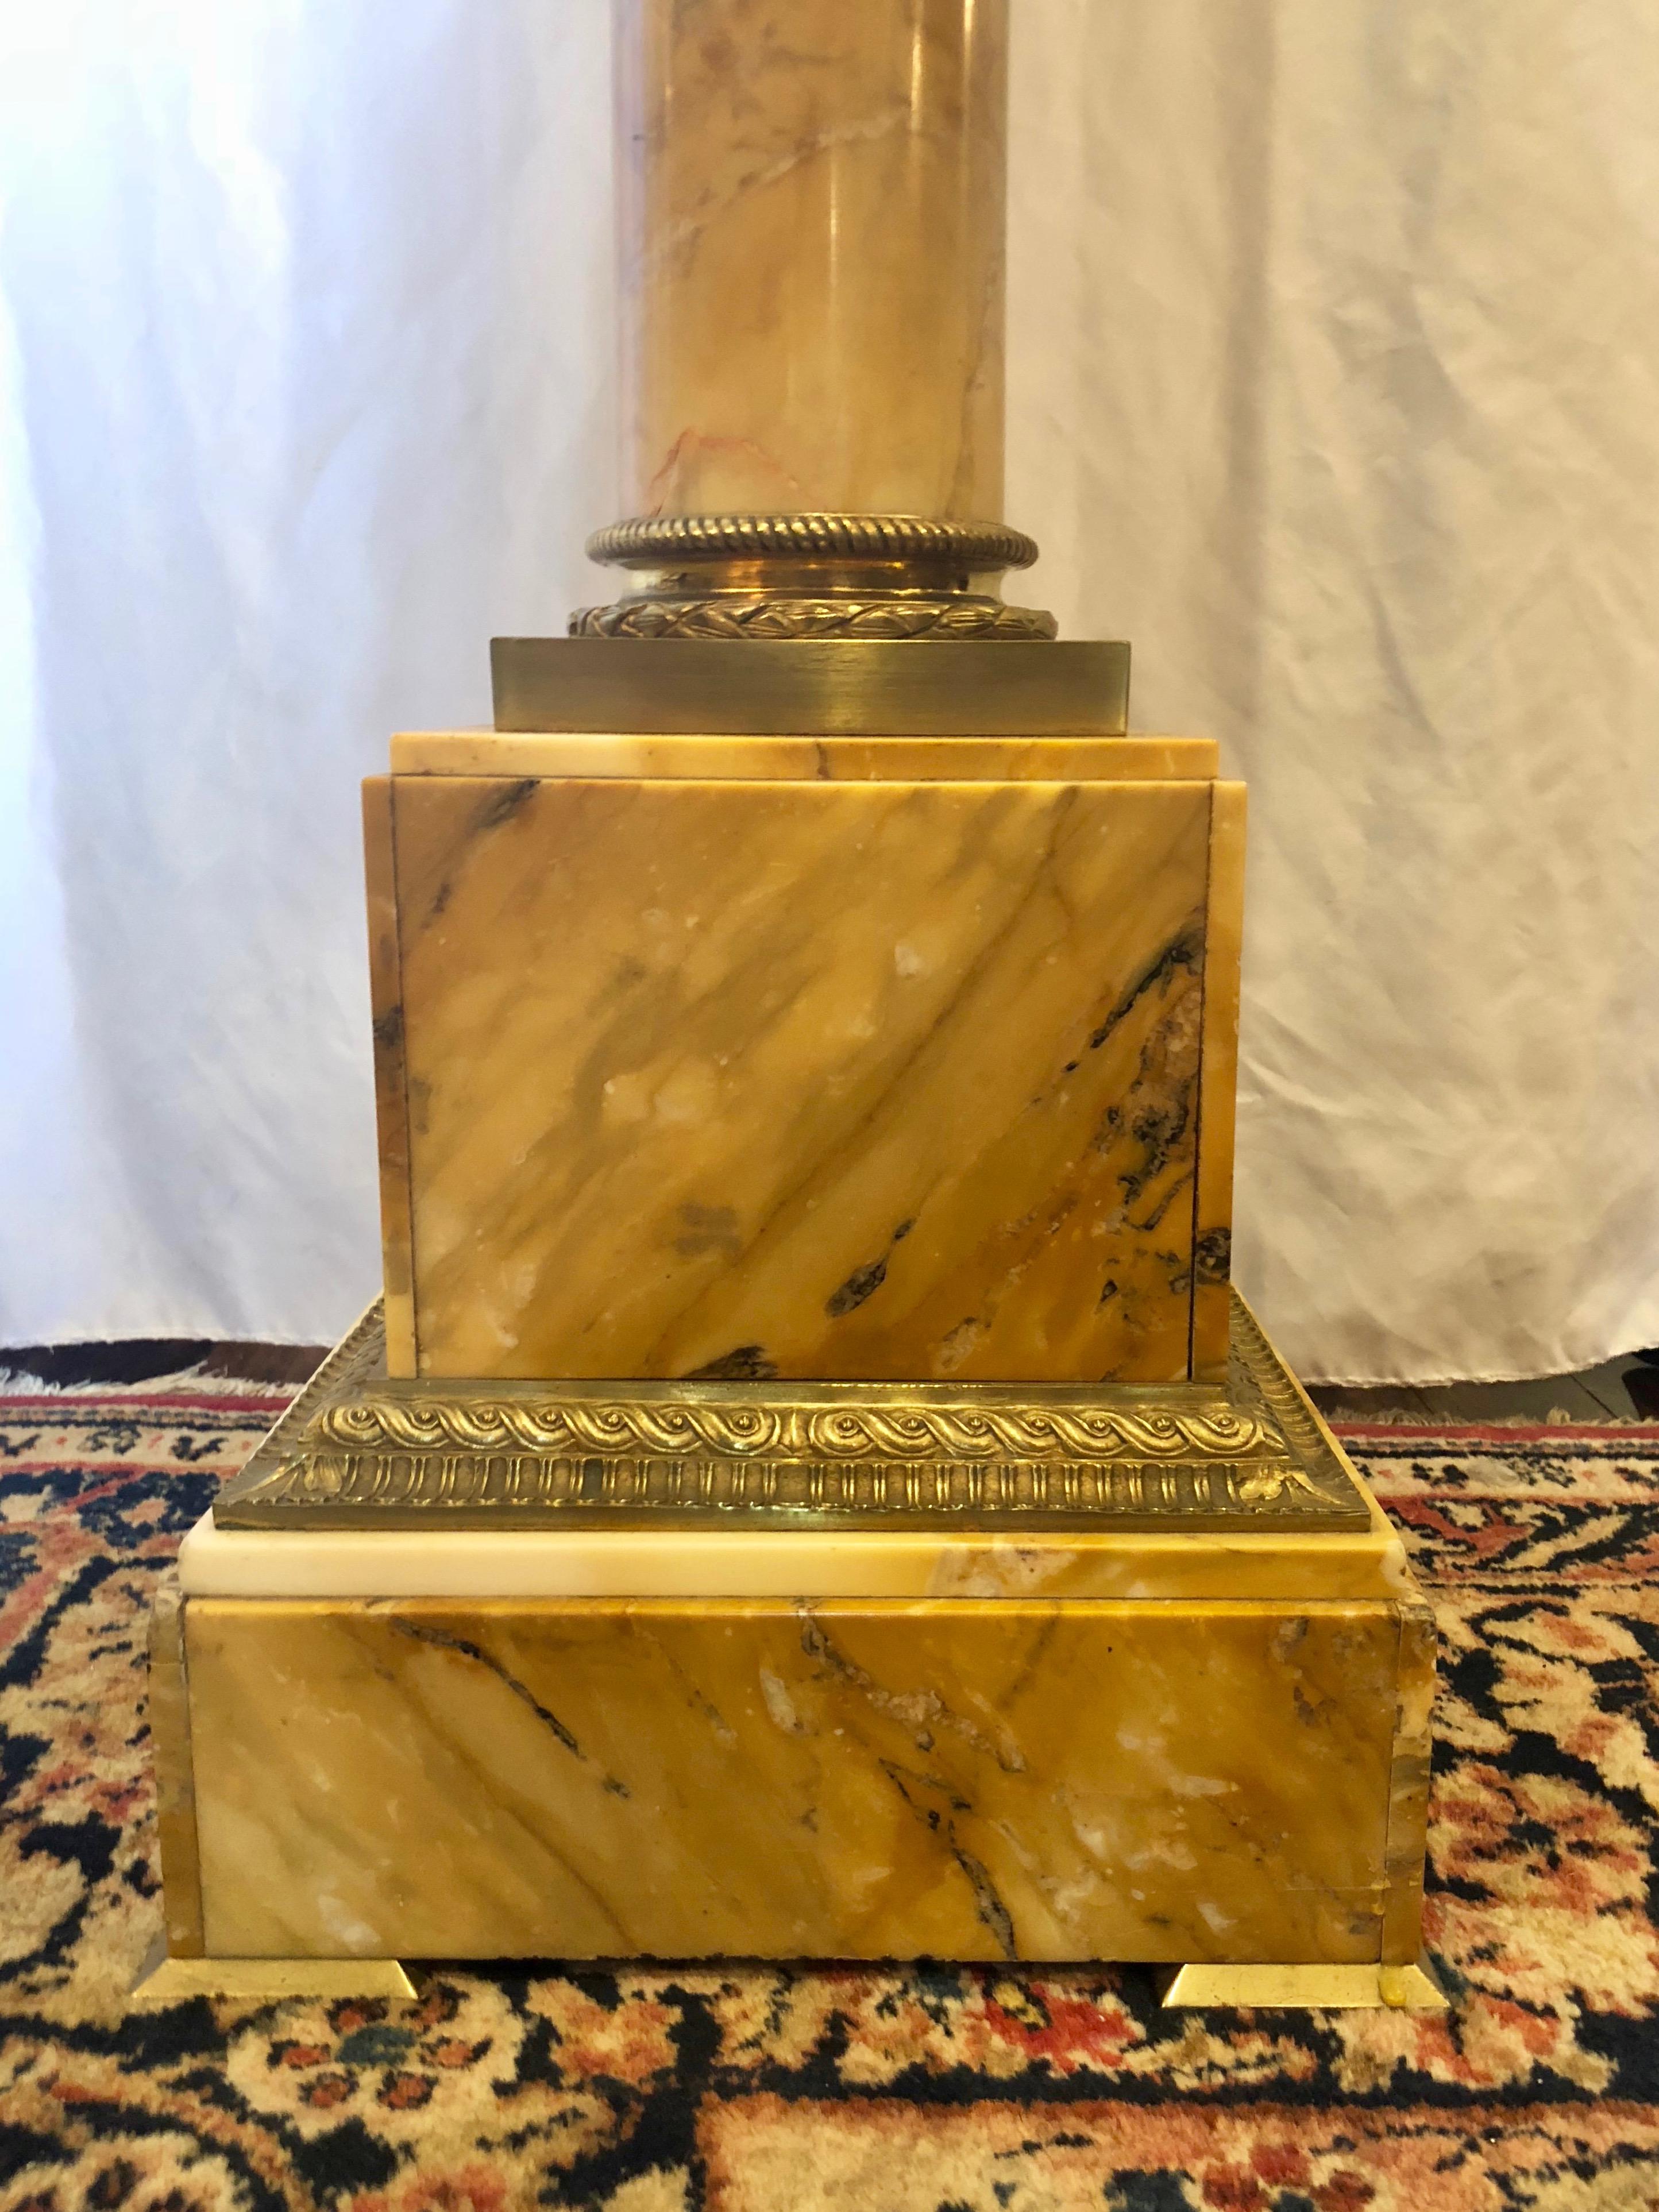 The lovely marble on this pedestal is very, very appealing.